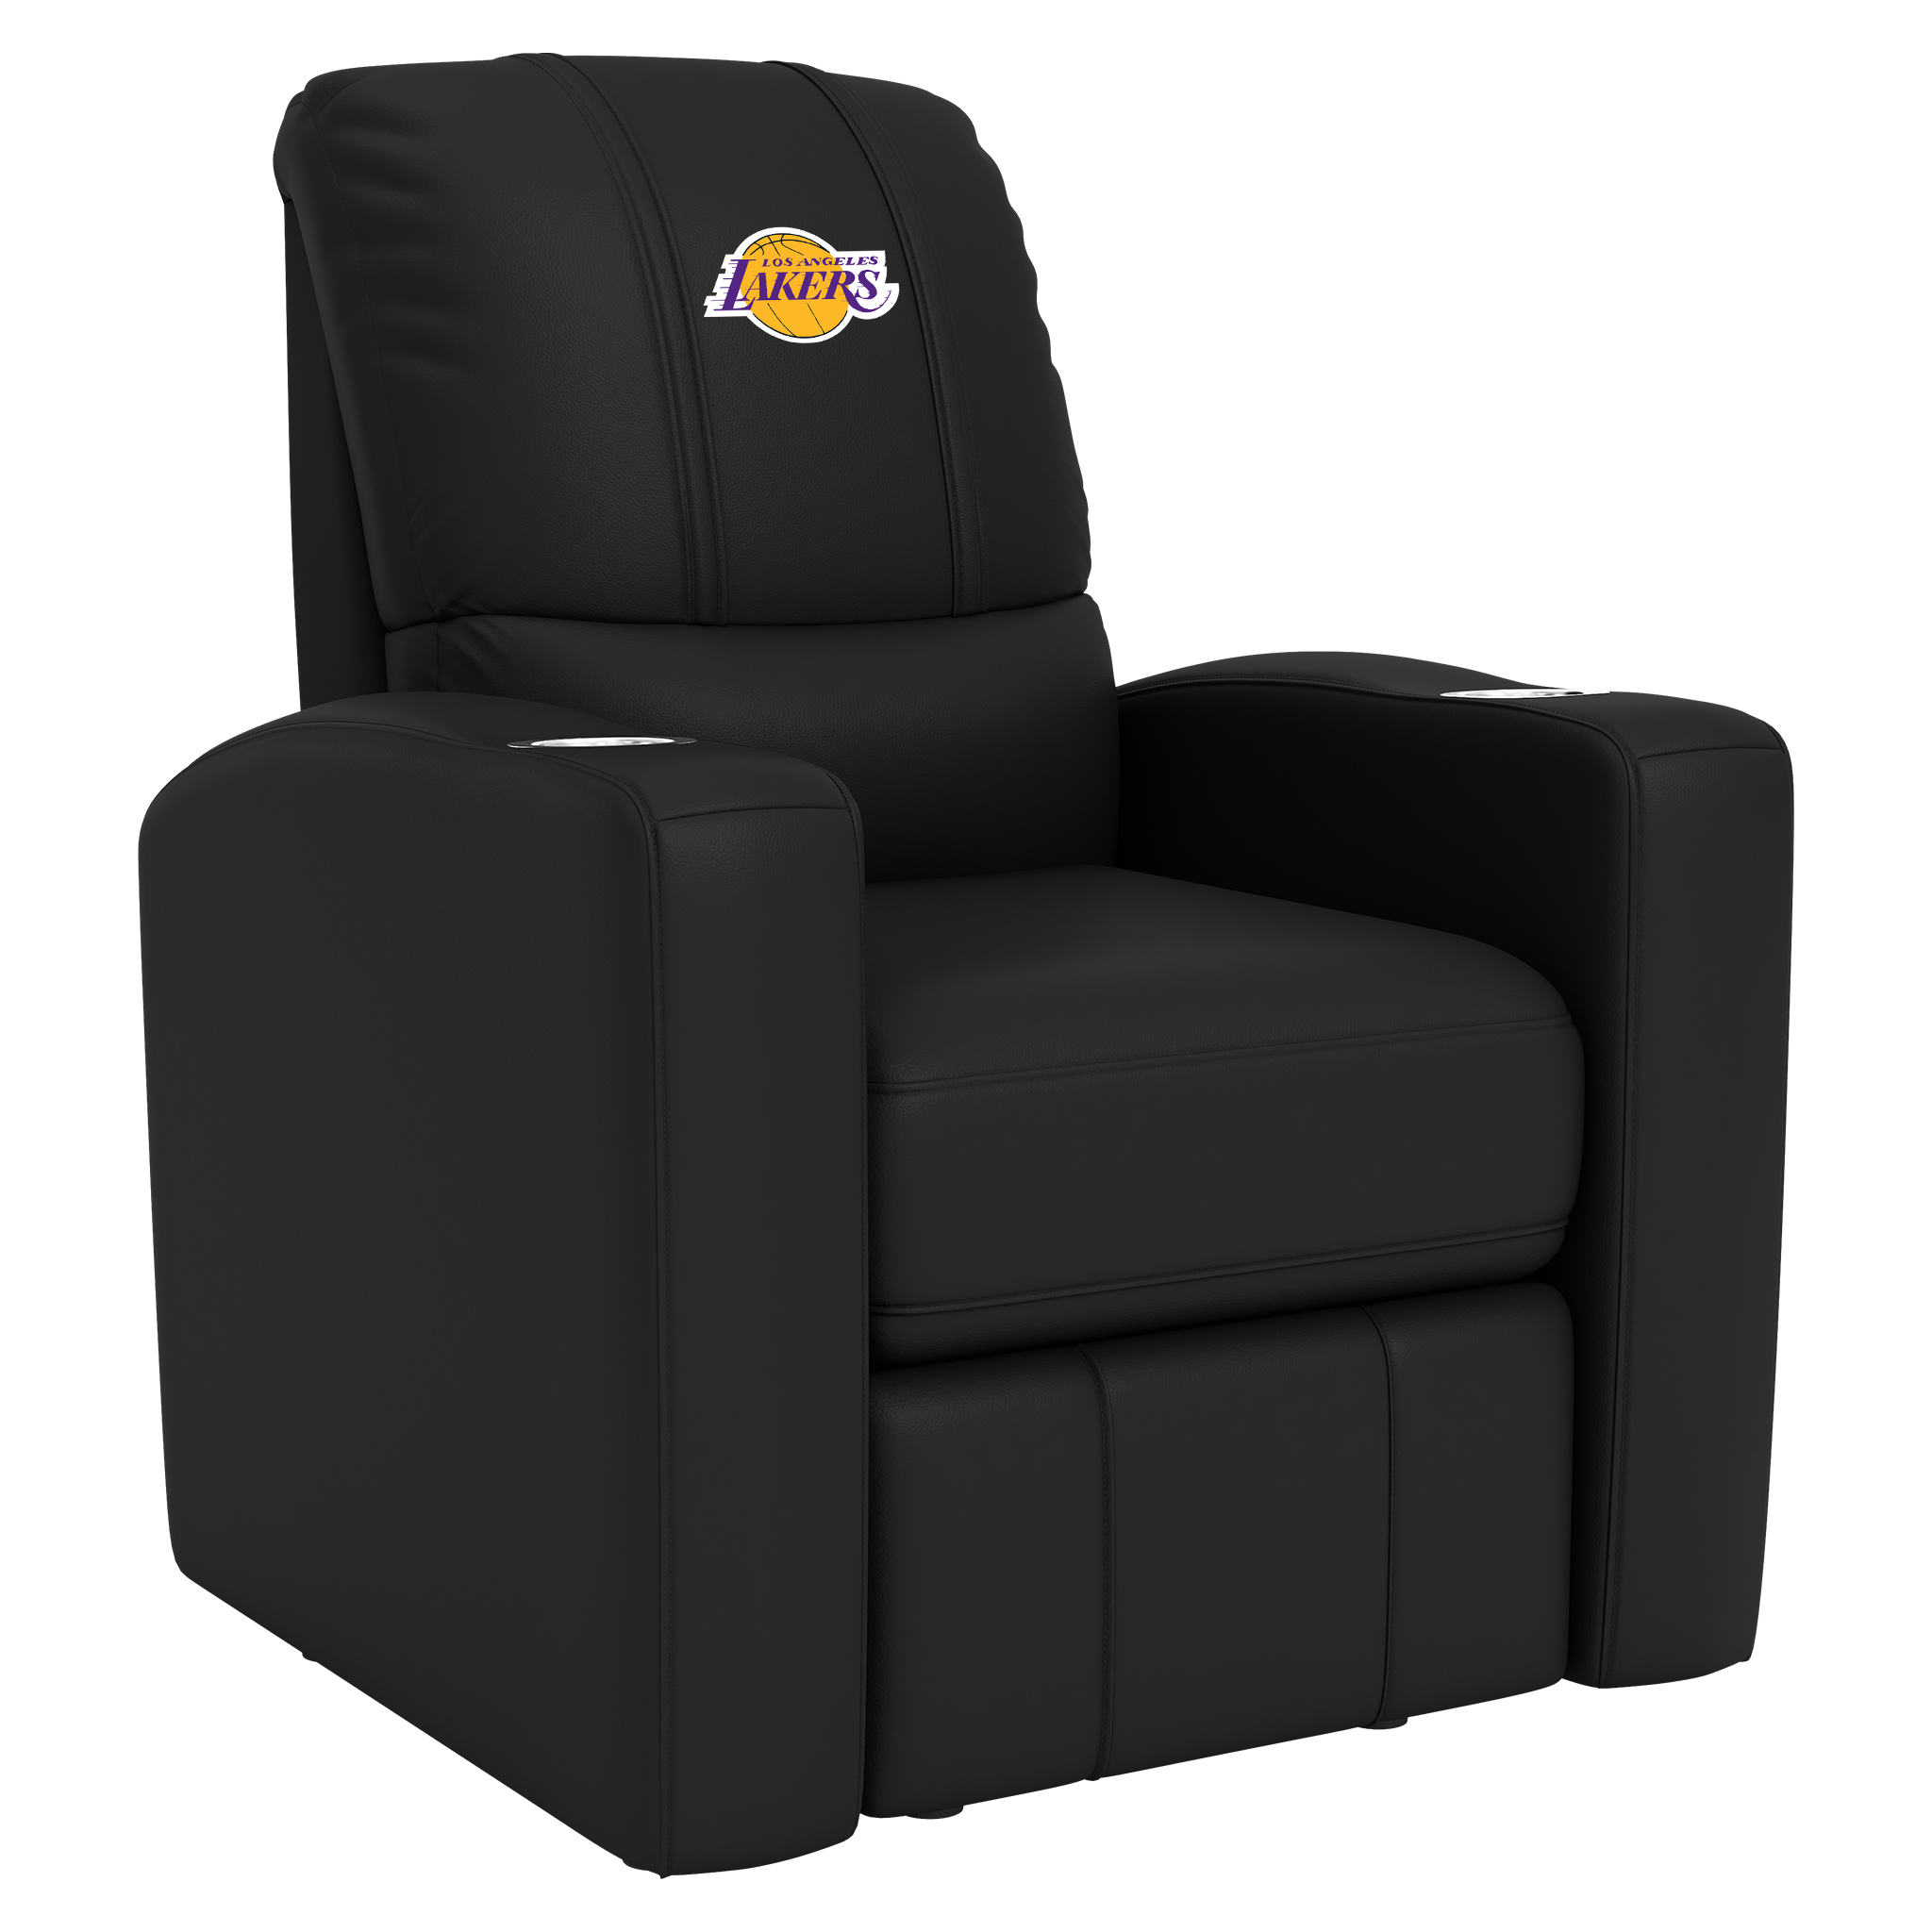 Los Angeles Lakers Stealth Recliner with Los Angeles Lakers Logo